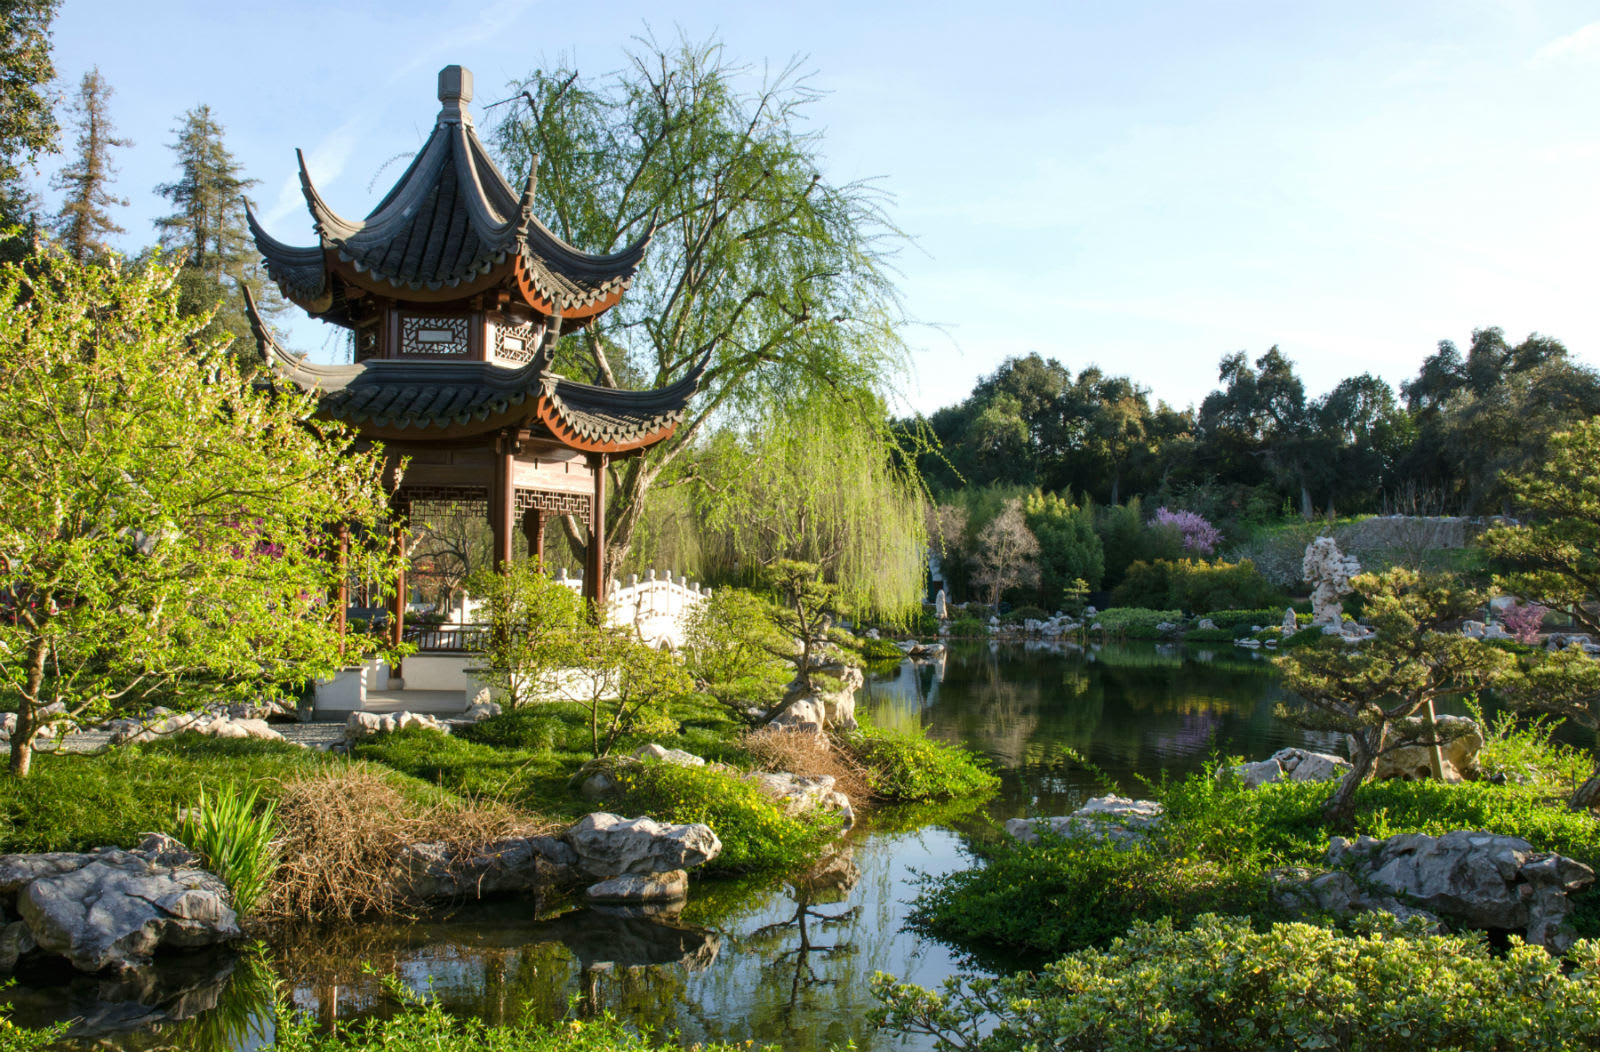 Image of Nature, Outdoors, Pond, Water, Pagoda, Prayer, Shrine, Temple, Scenery, 